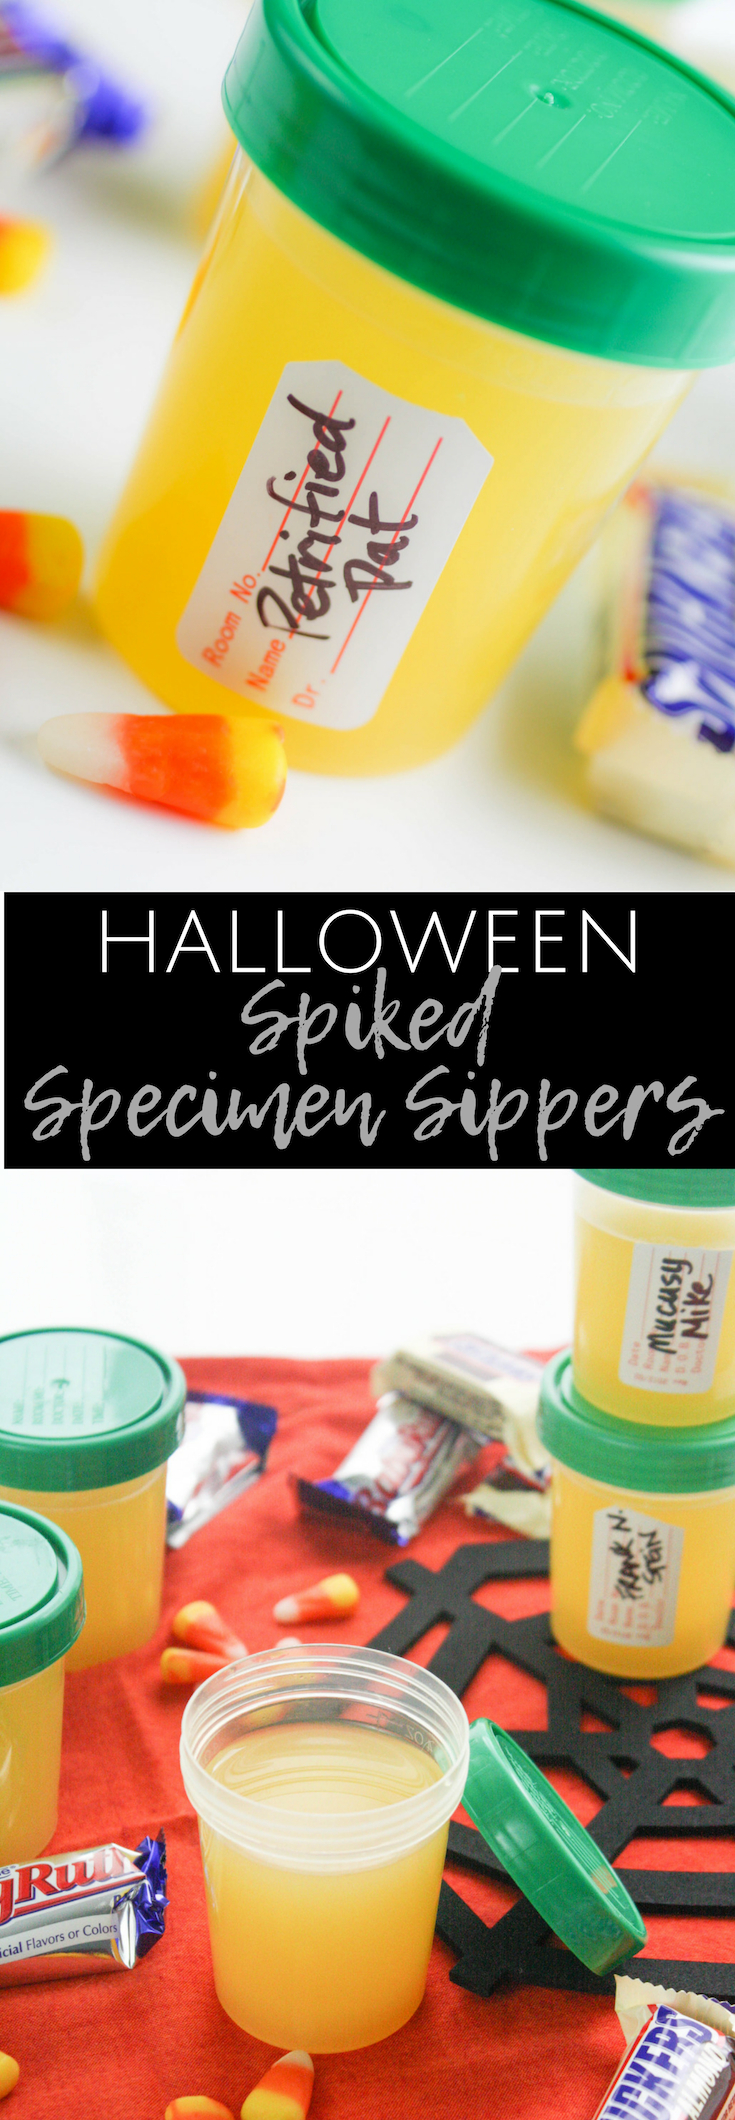 Halloween Spiked Specimen Sippers are hilarious, and fun to serve at your next Halloween party! Halloween Spiked Specimen Sippers make Halloween ghastly and fun!